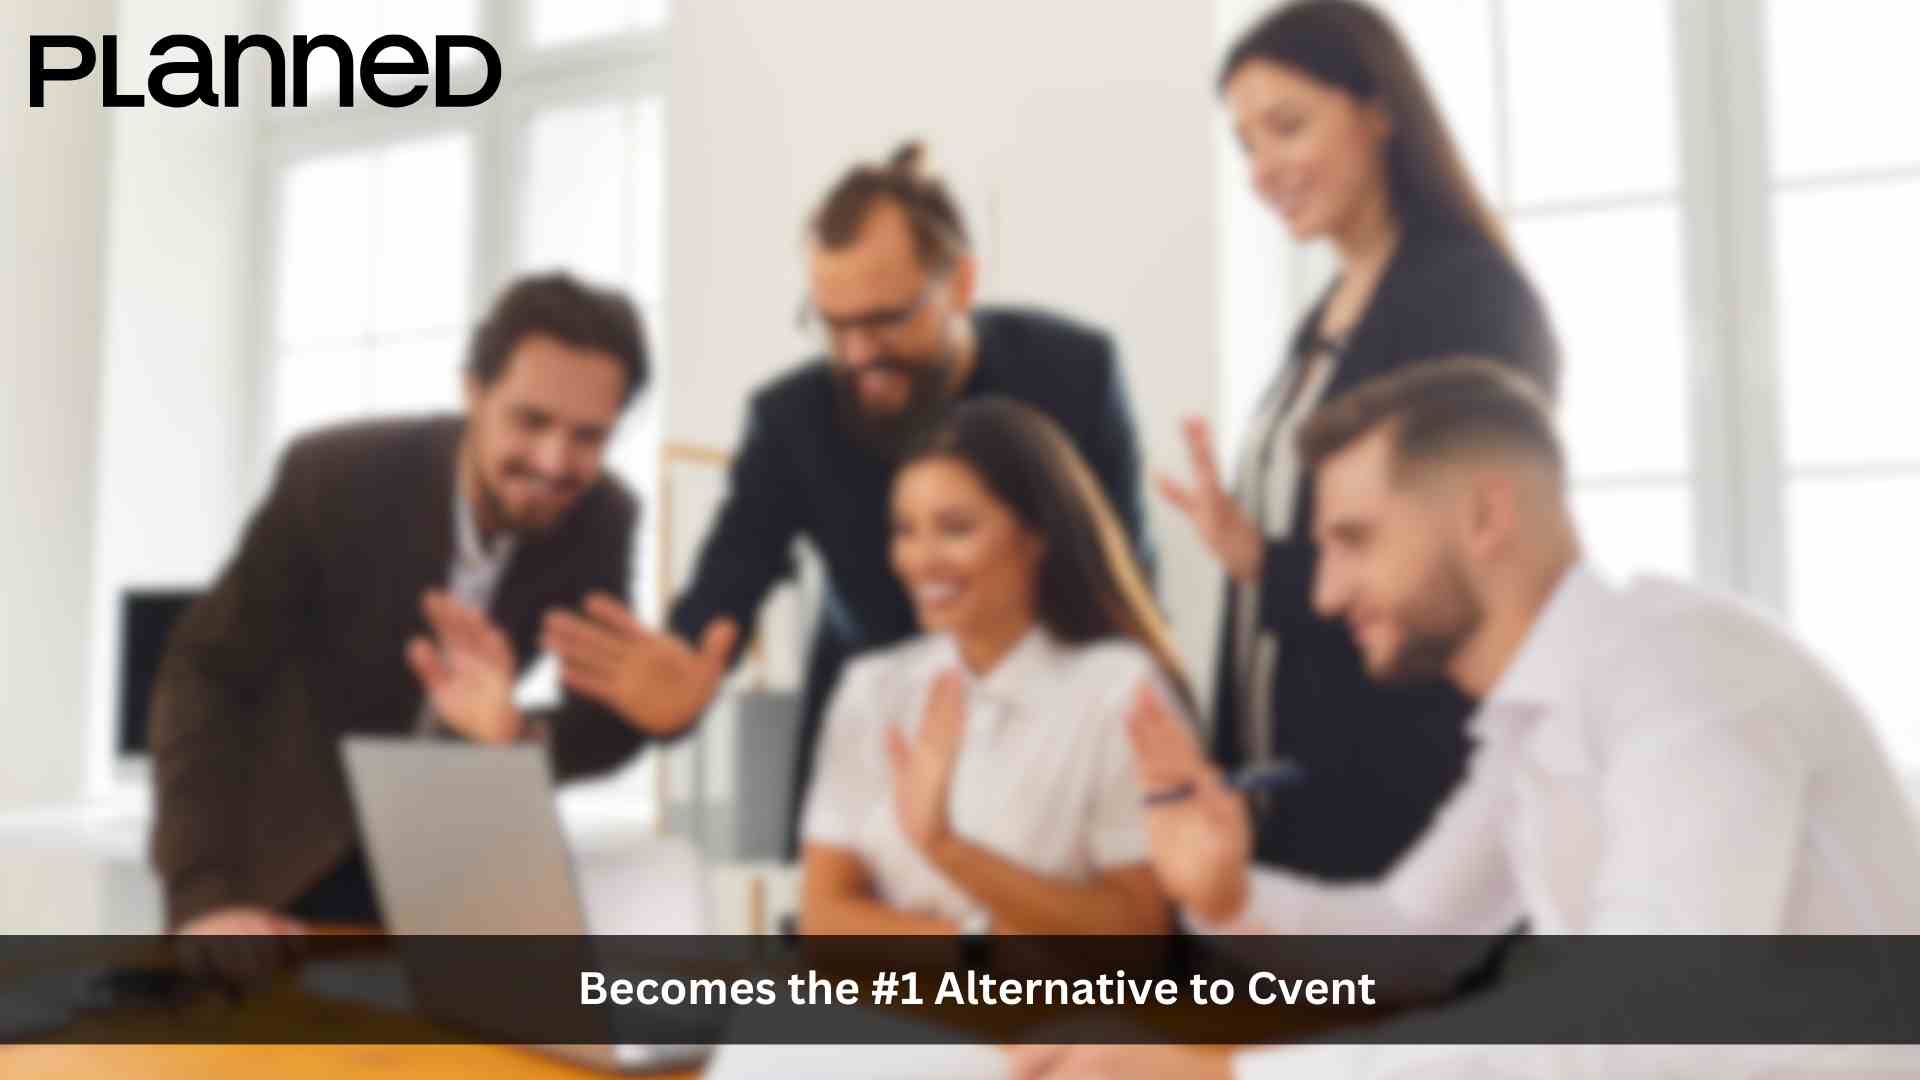 With its new suite of attendee management features, Planned becomes the #1 alternative to Cvent